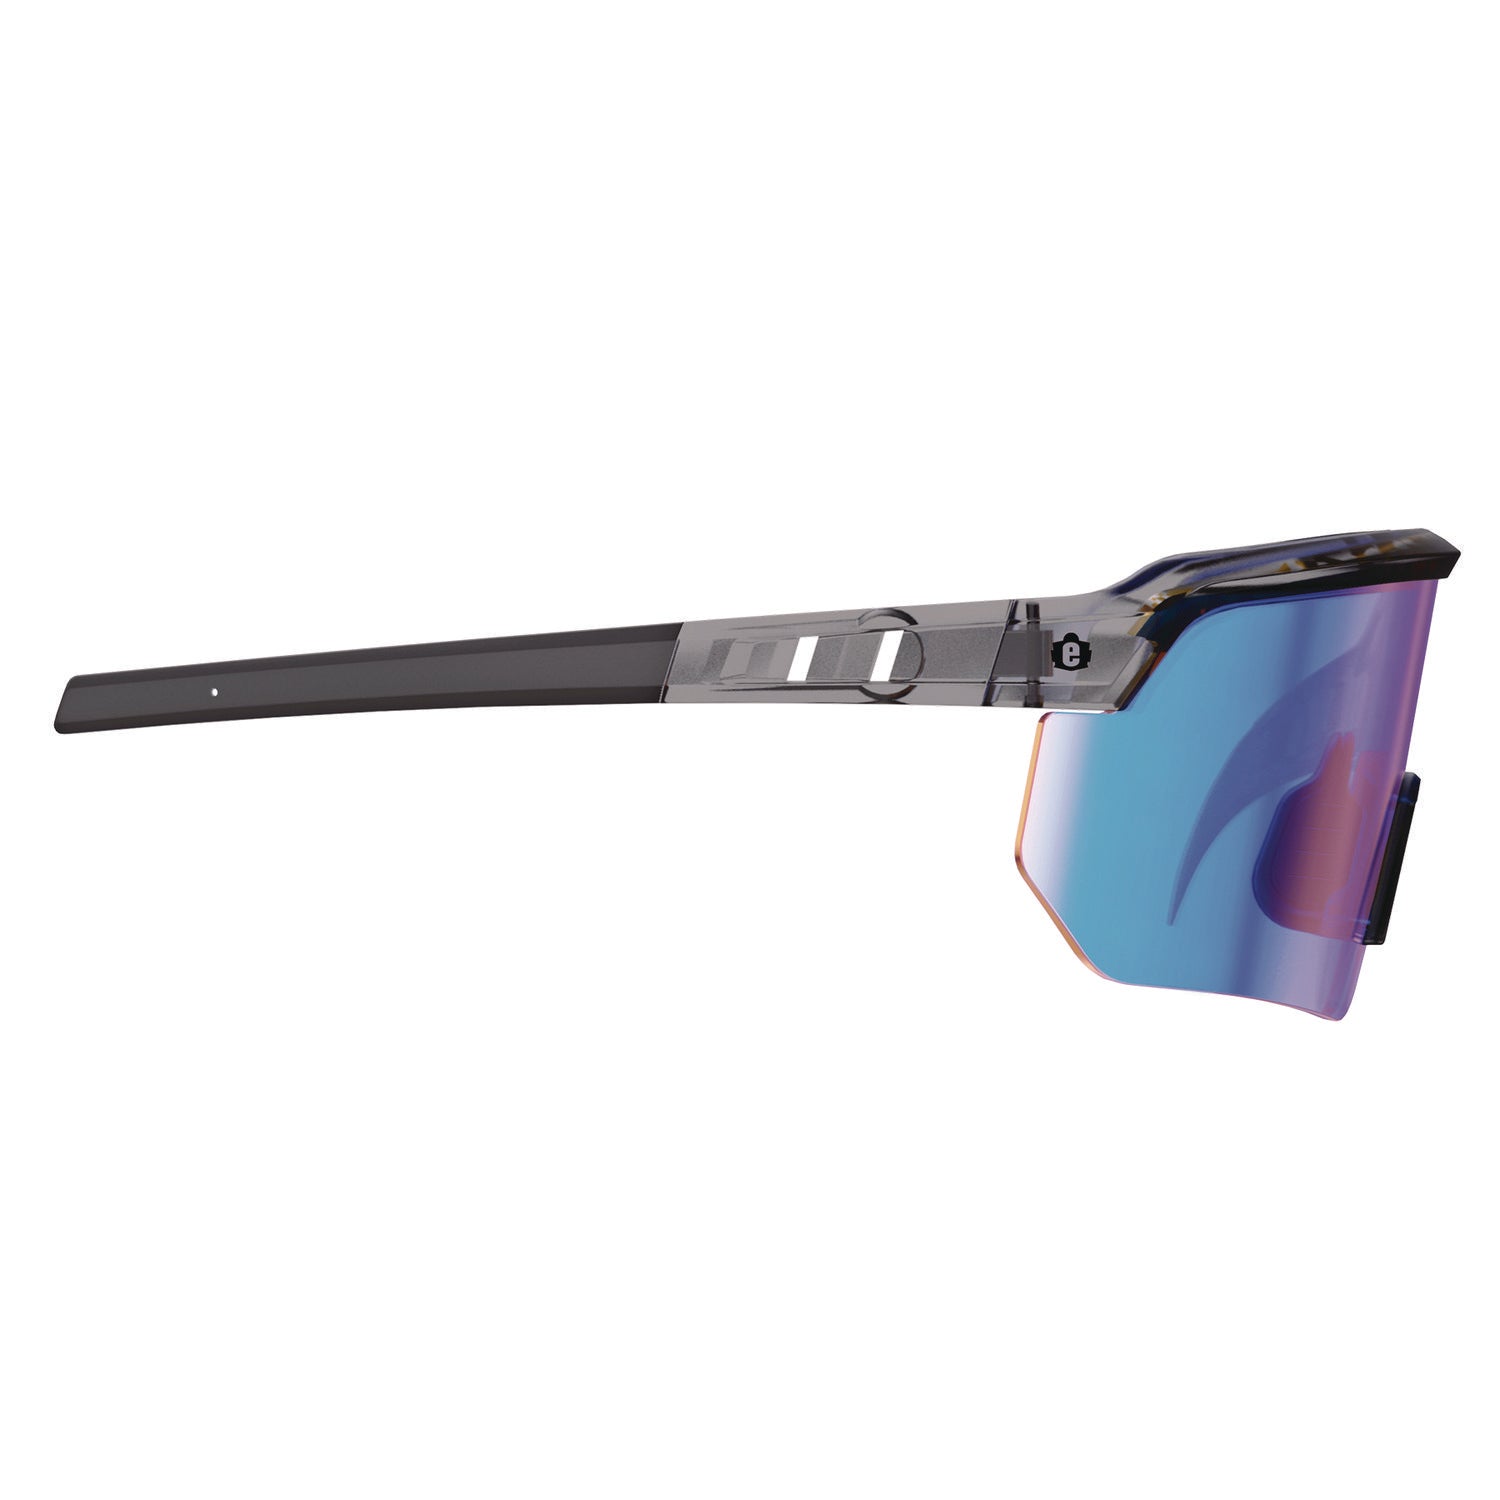 skullerz-aegir-safety-glasses-with-mirrored-lenses-clear-smoke-frame-blue-mirror-polycarbonate-lens-ships-in-1-3-bus-days_ego55011 - 3